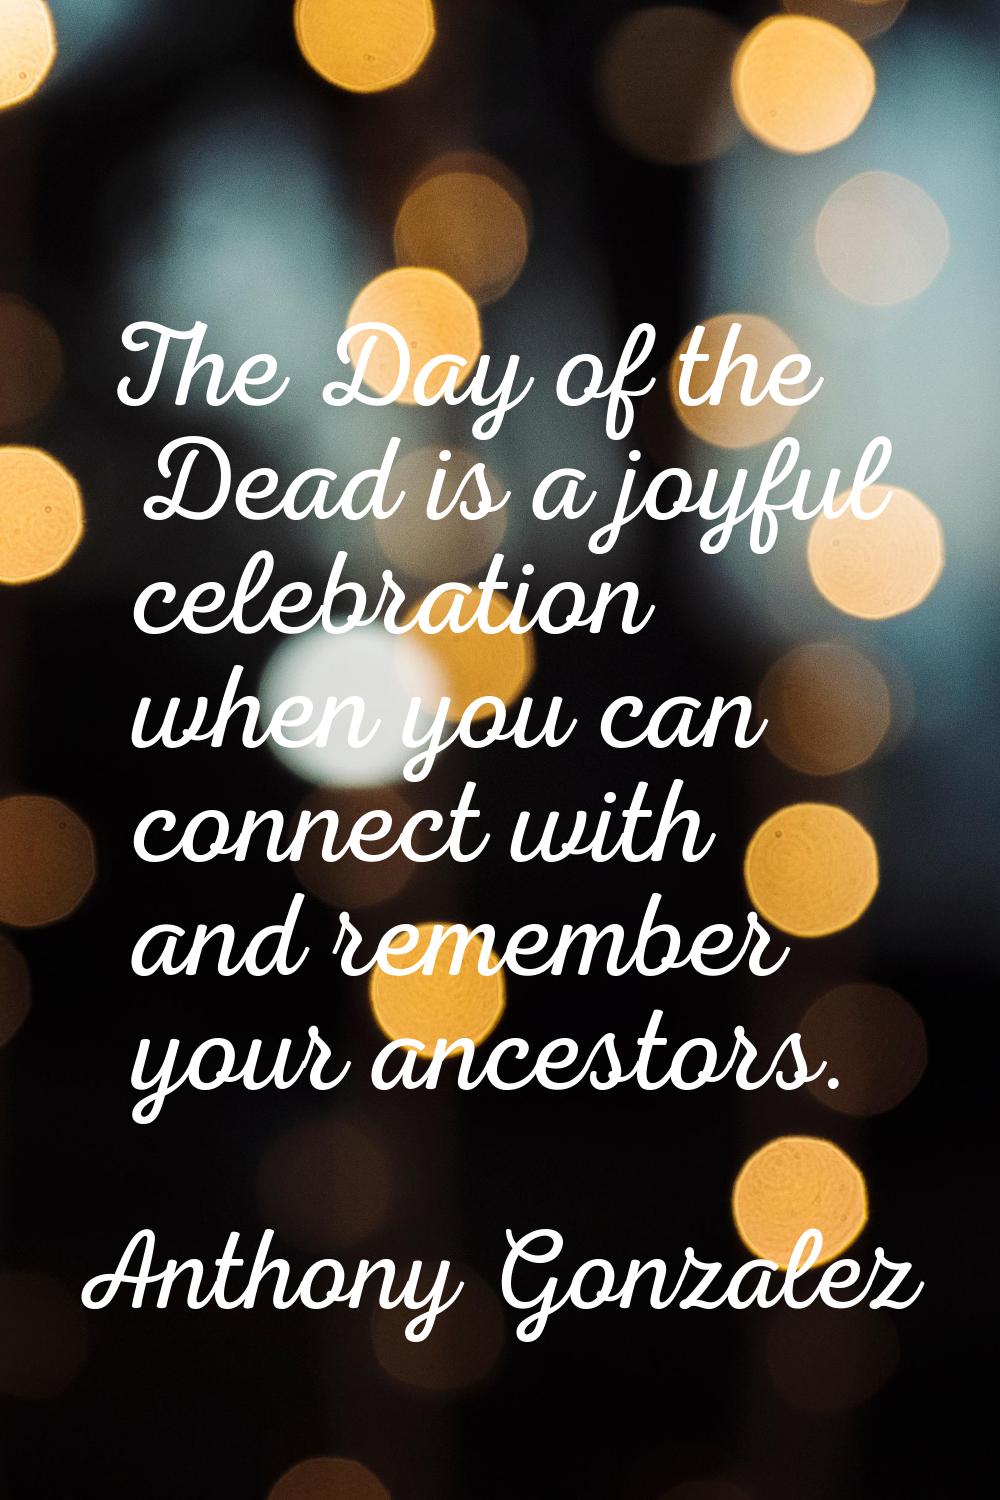 The Day of the Dead is a joyful celebration when you can connect with and remember your ancestors.